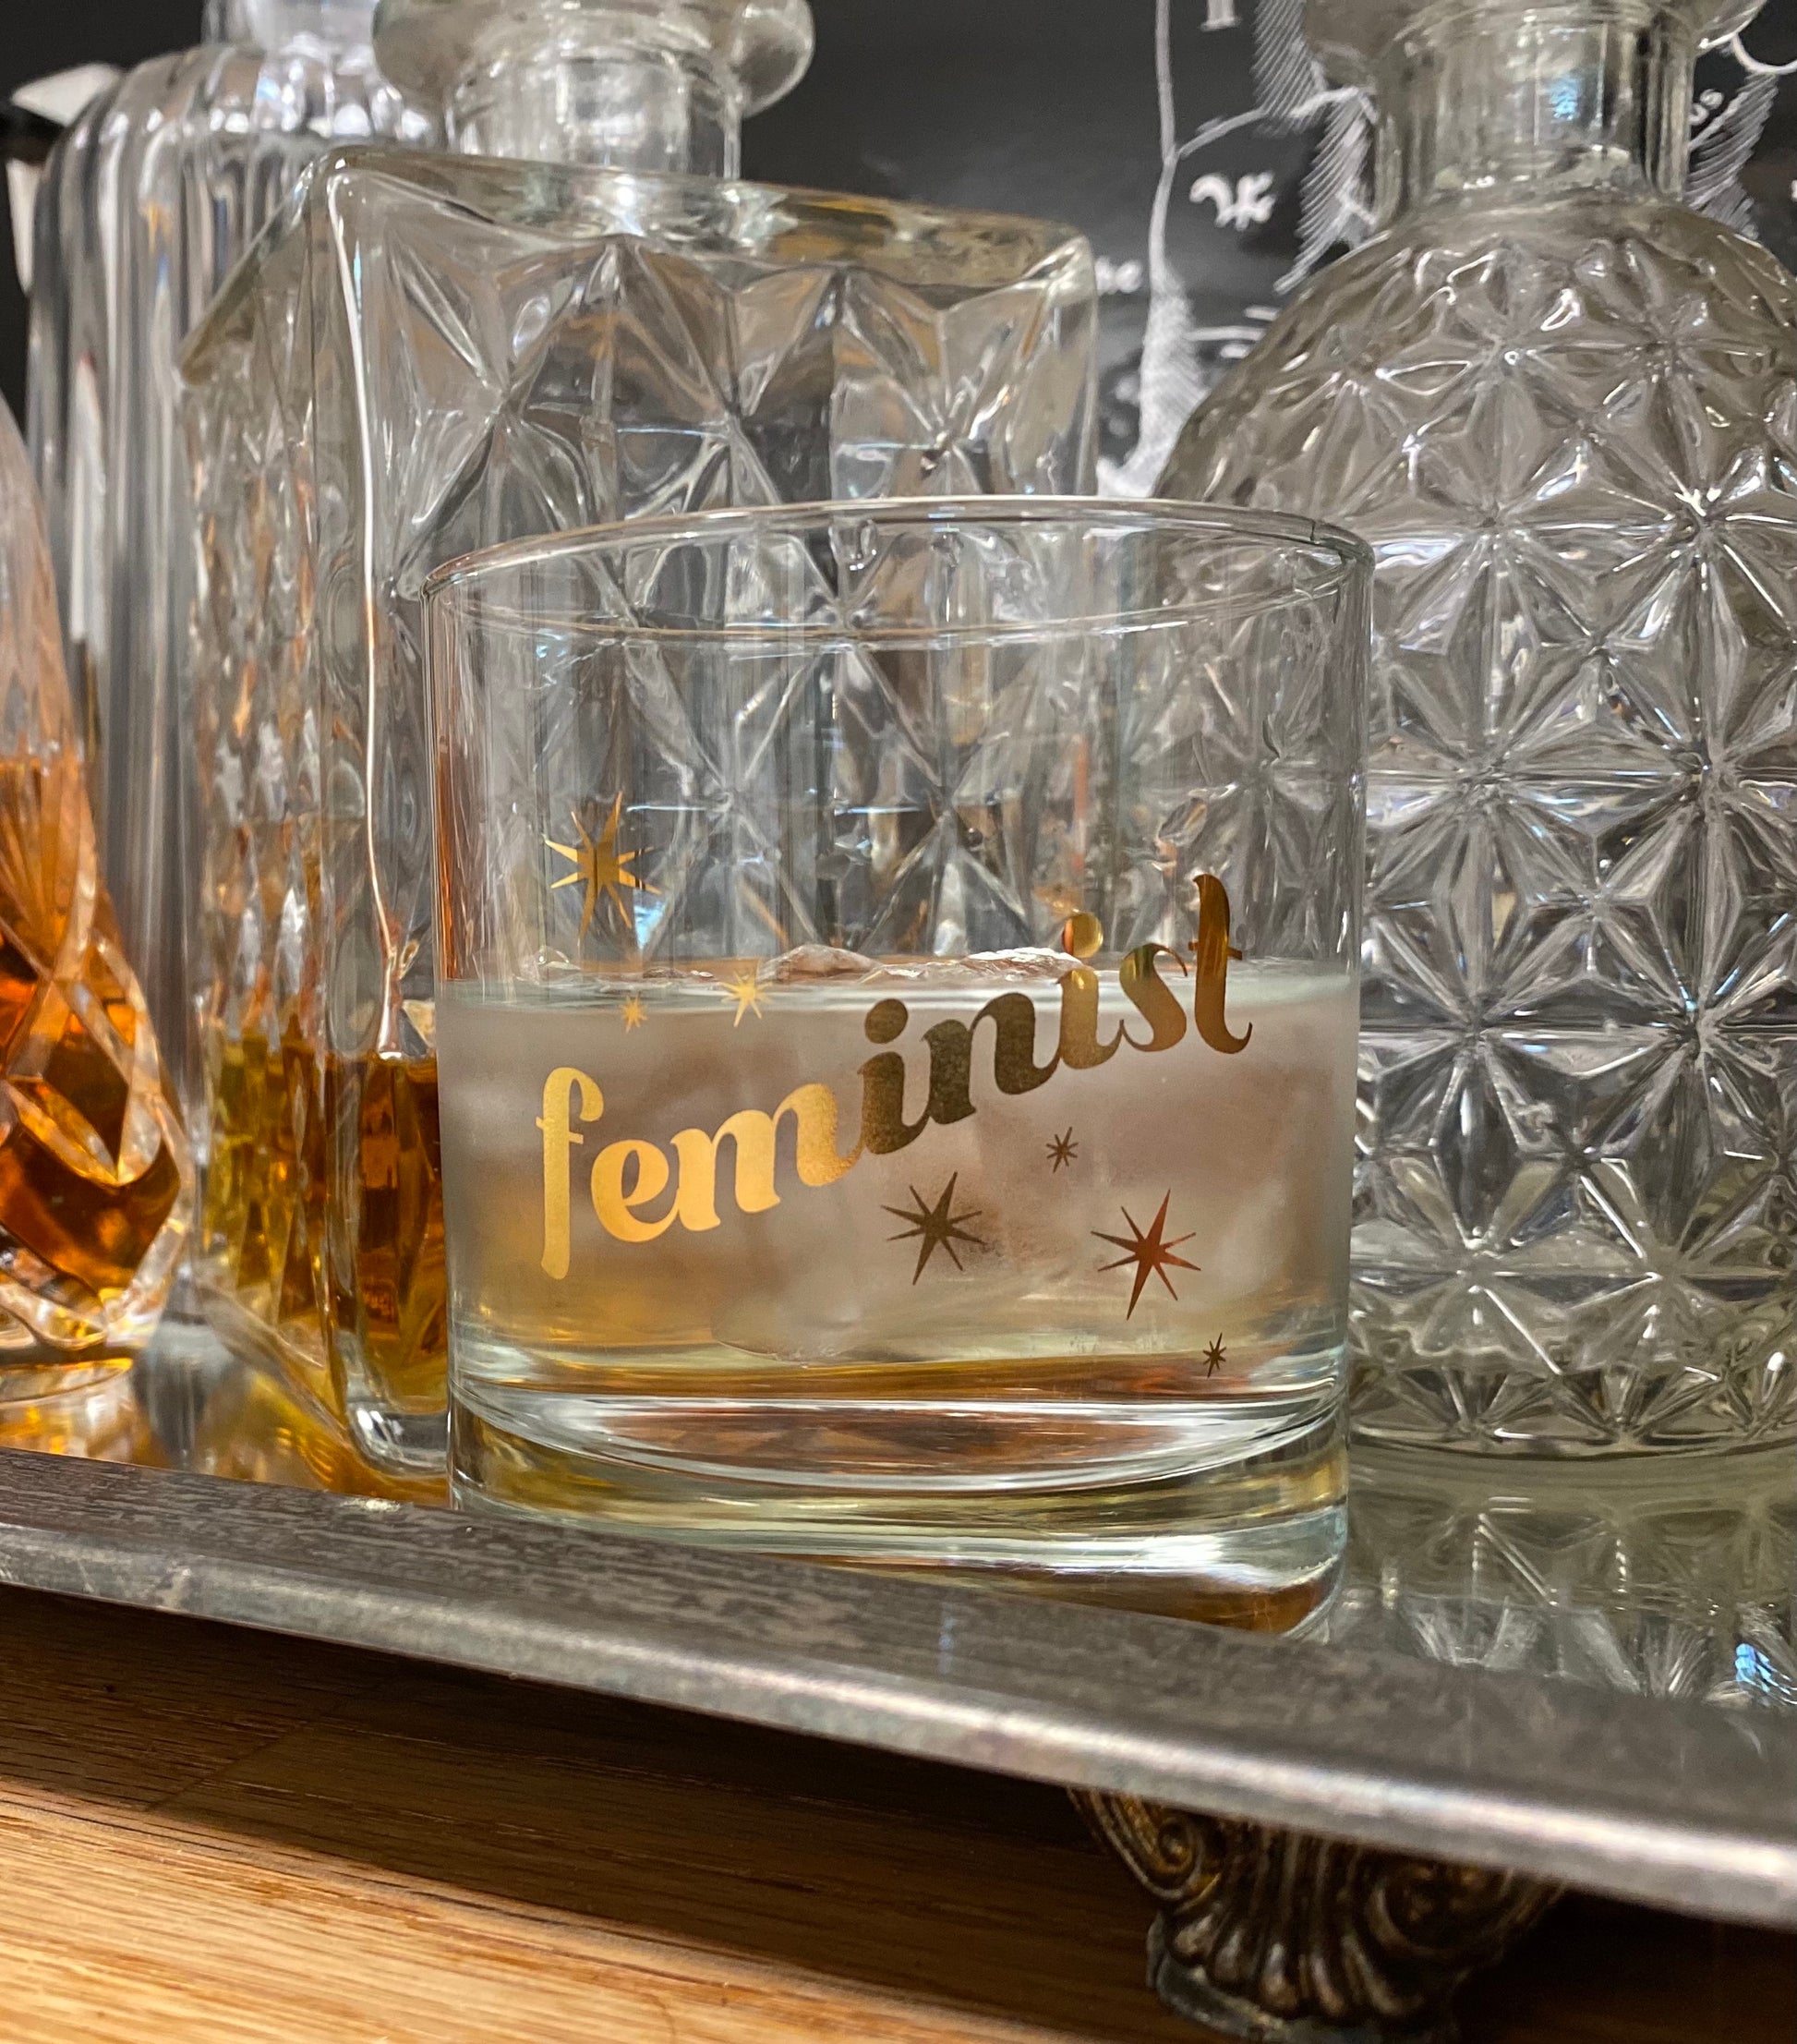 drinking glass that has feminist and stars printed on it in gold